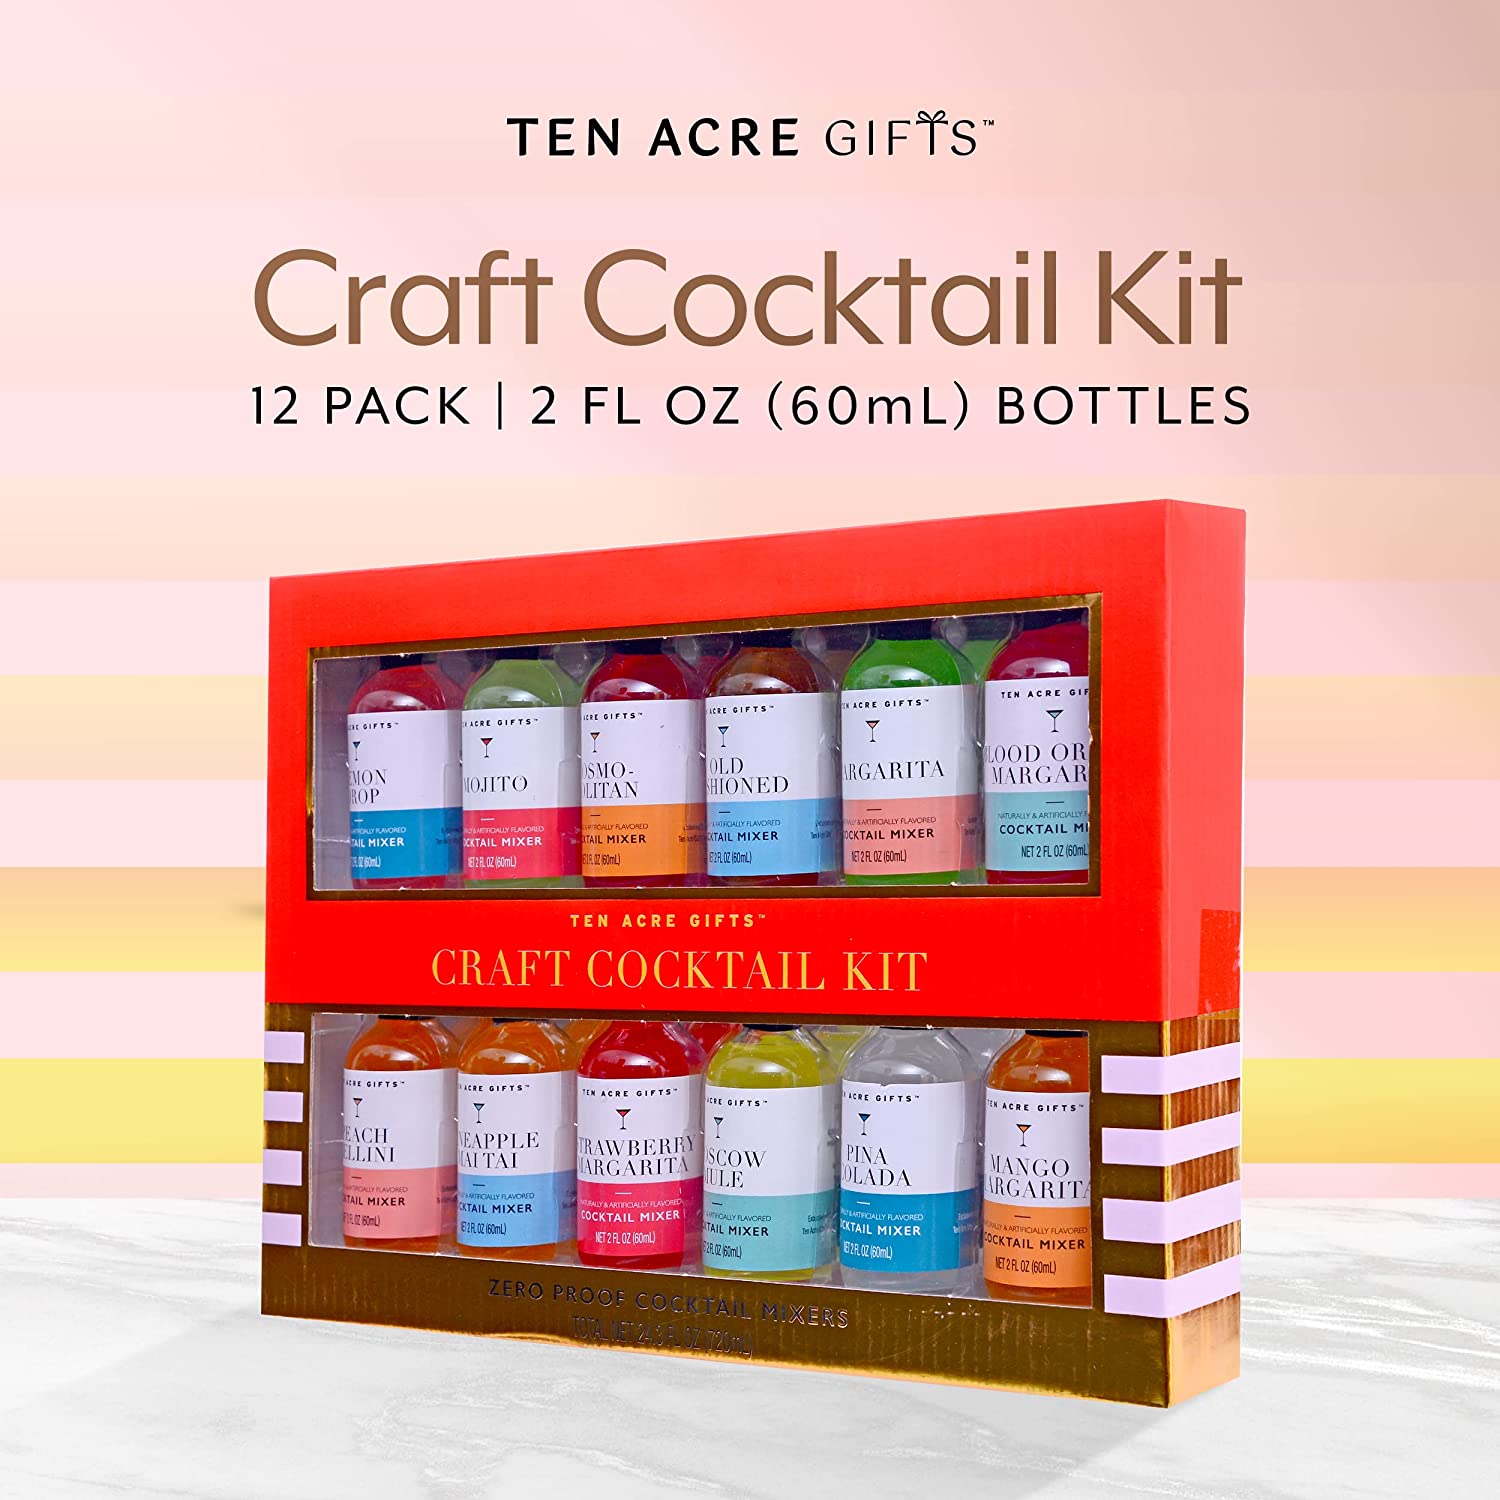 Instant Citrus Mimosa Kit – Lord & Taylor